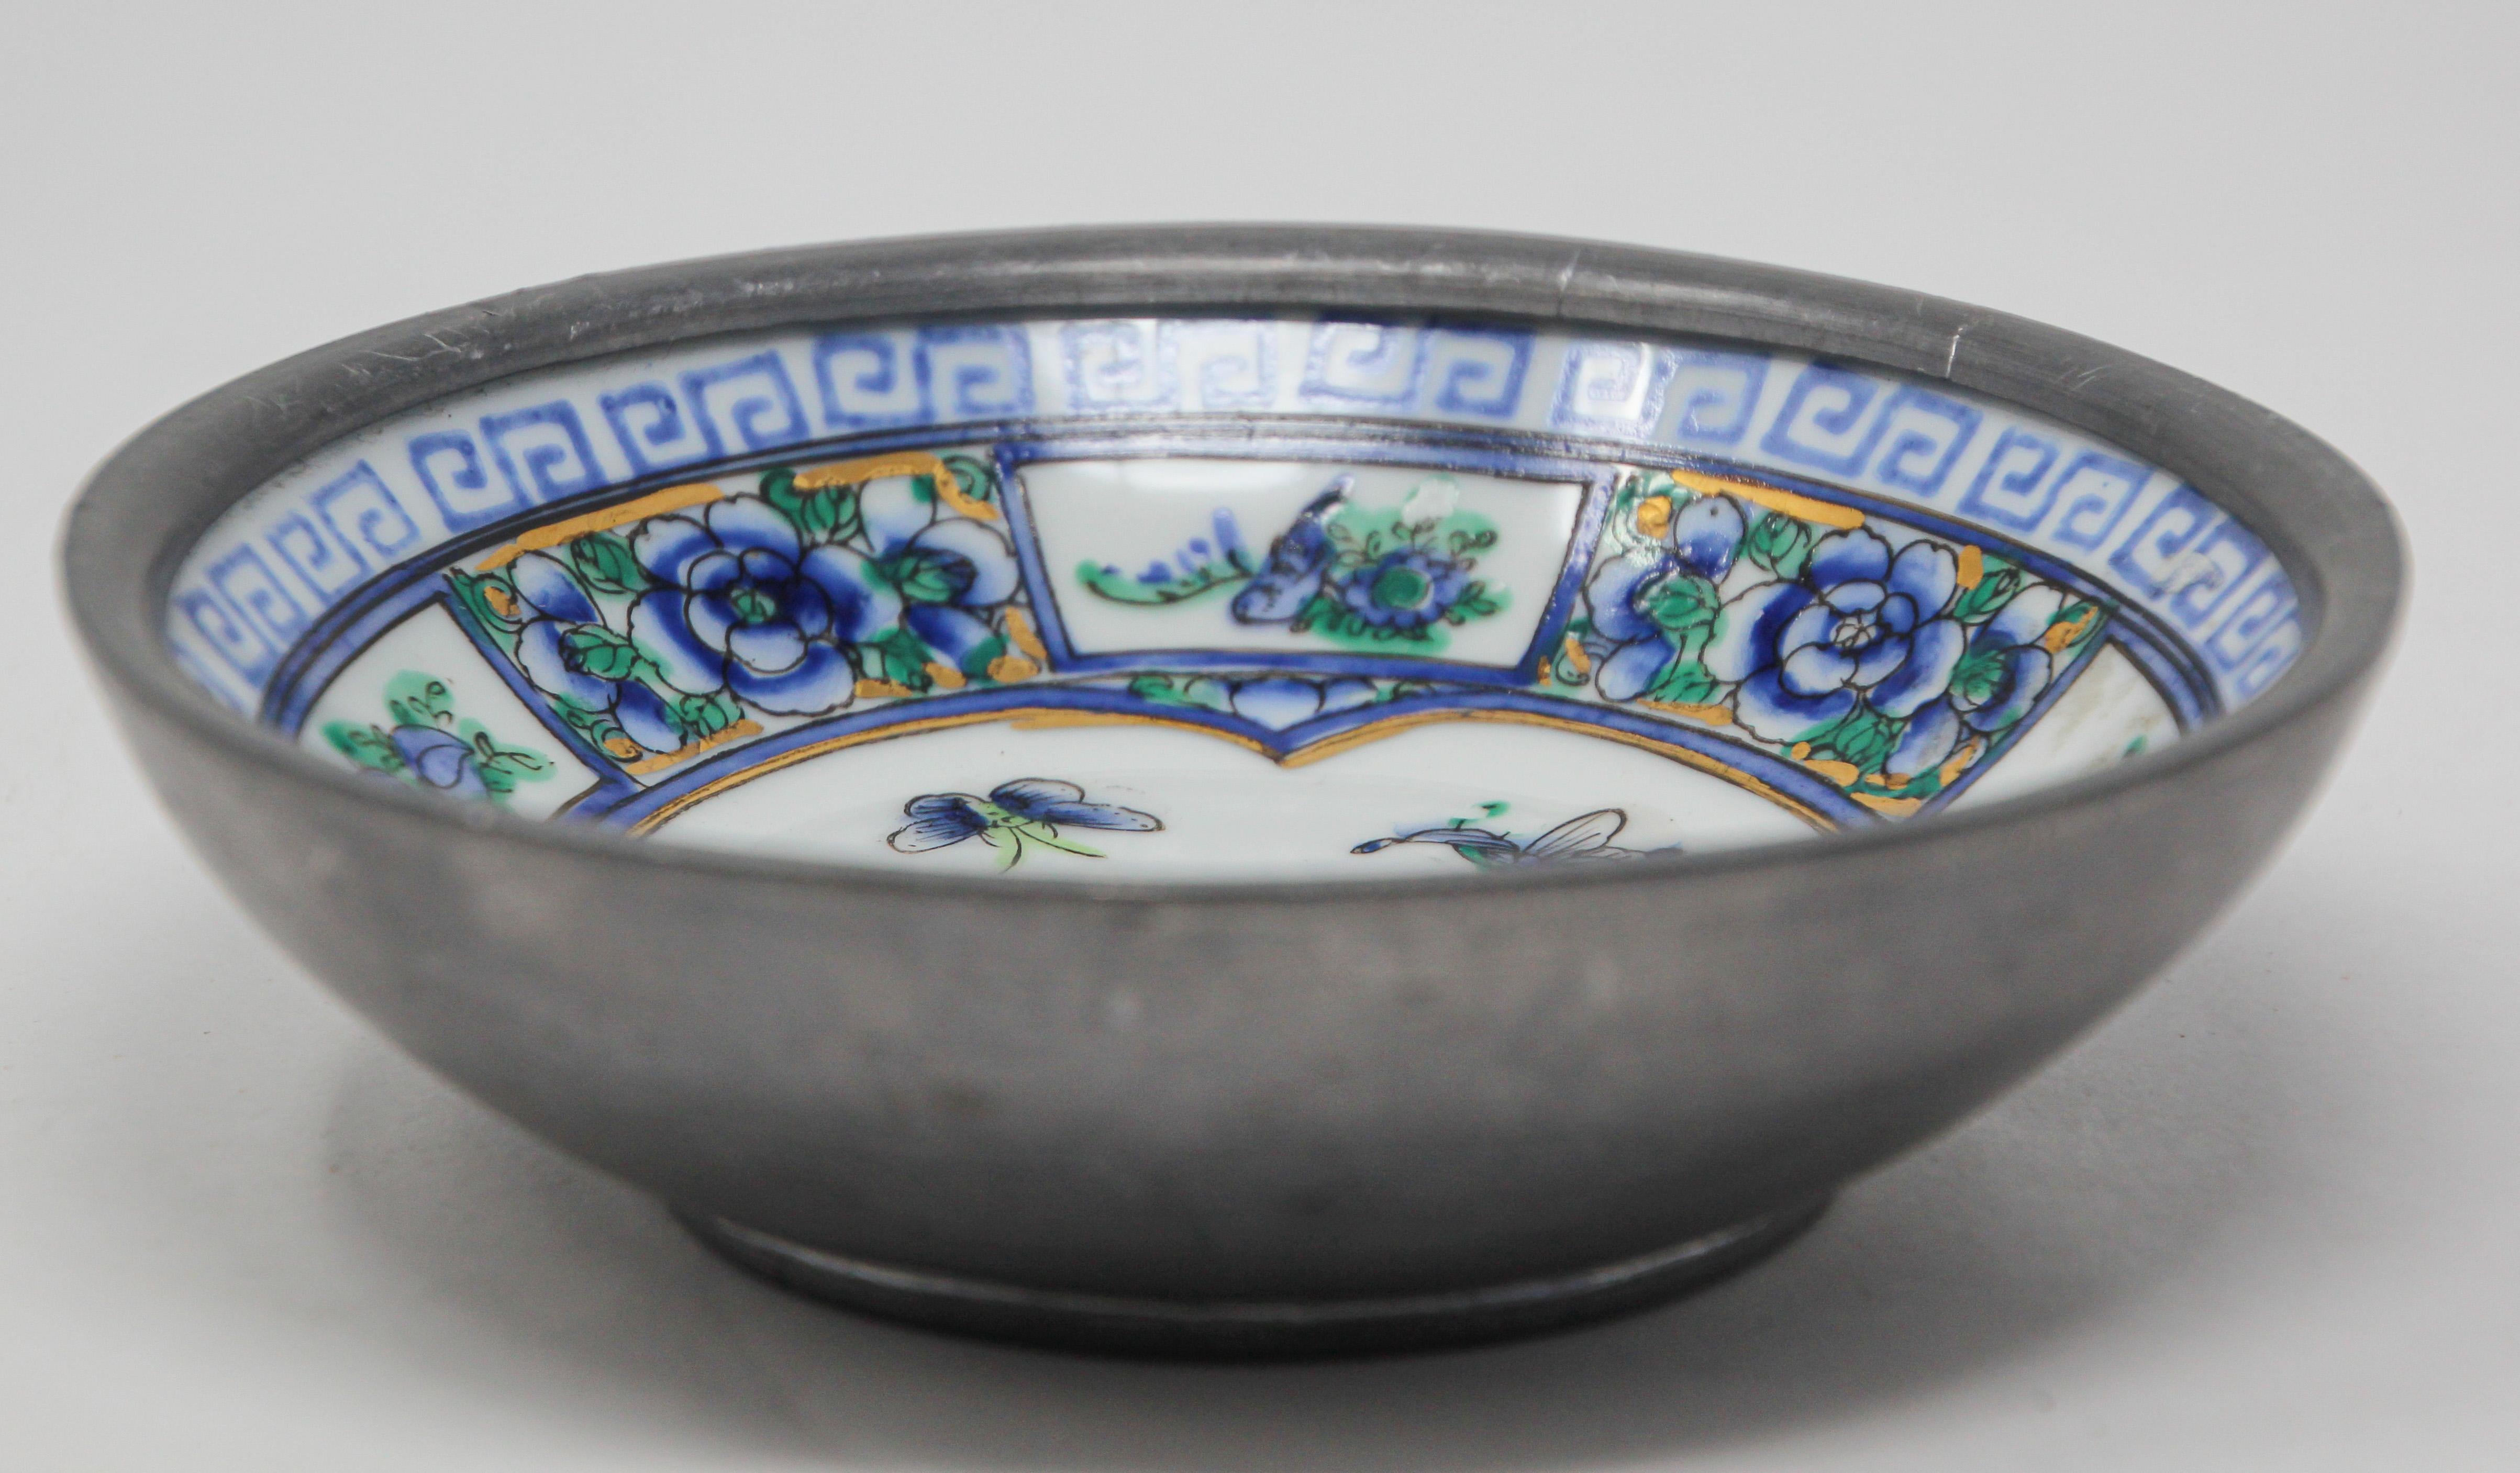 Chinese Export Vintage Blue and White Porcelain Bowl, Catchall Encased in Pewter